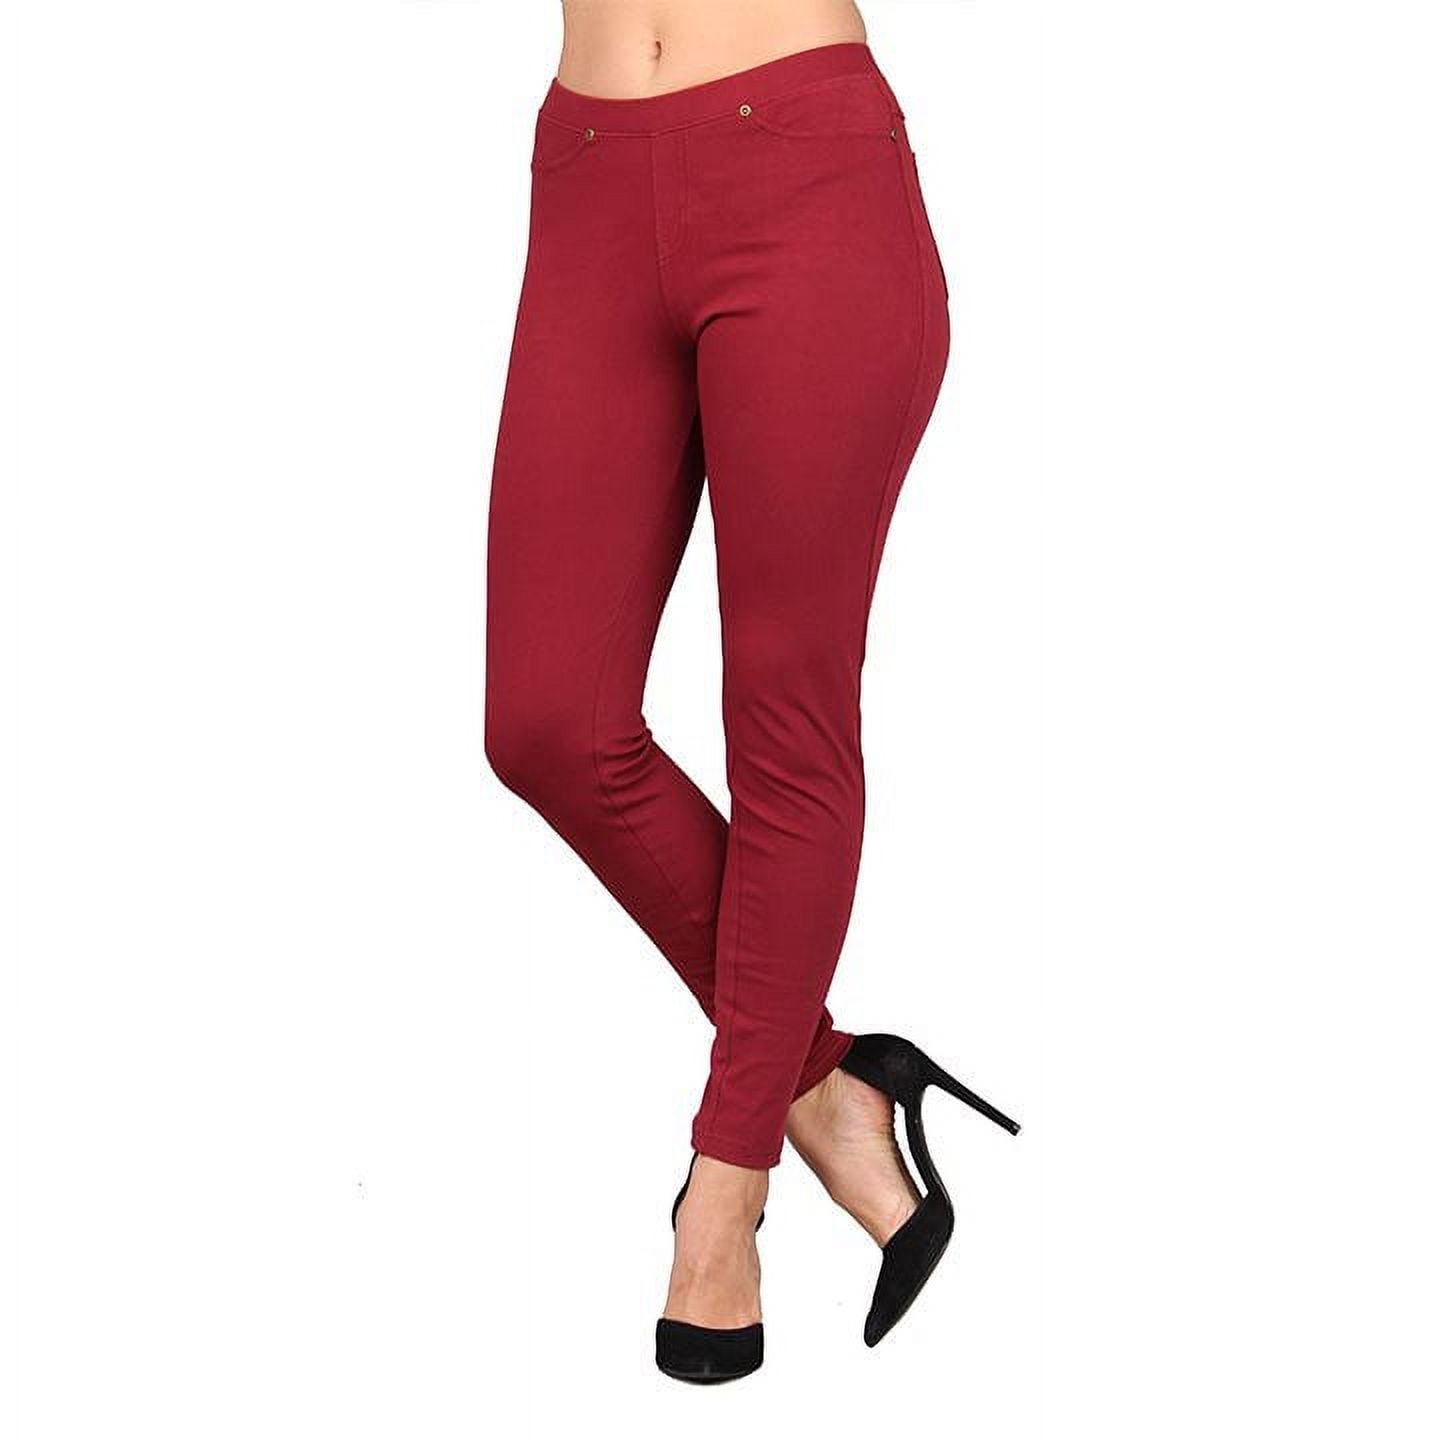 Lildy Women's Denim Jeggings, Stretchable Cotton Blend, Maroon,  Large/X-Large 